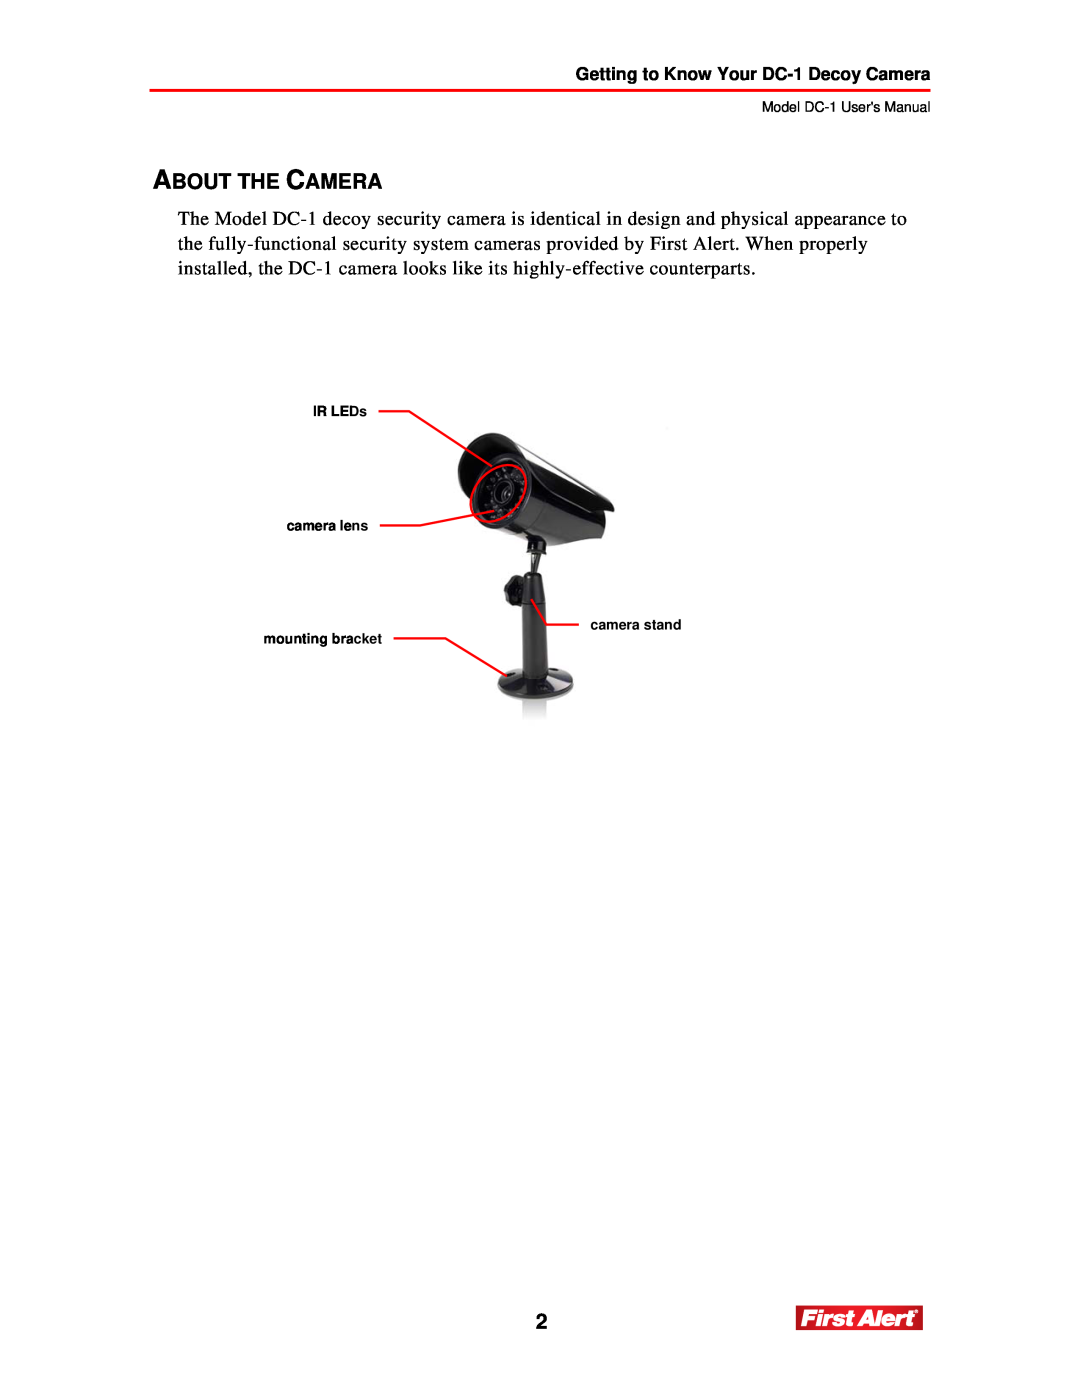 First Alert user manual About The Camera, Getting to Know Your DC-1 Decoy Camera, Model DC-1 Users Manual, camera stand 